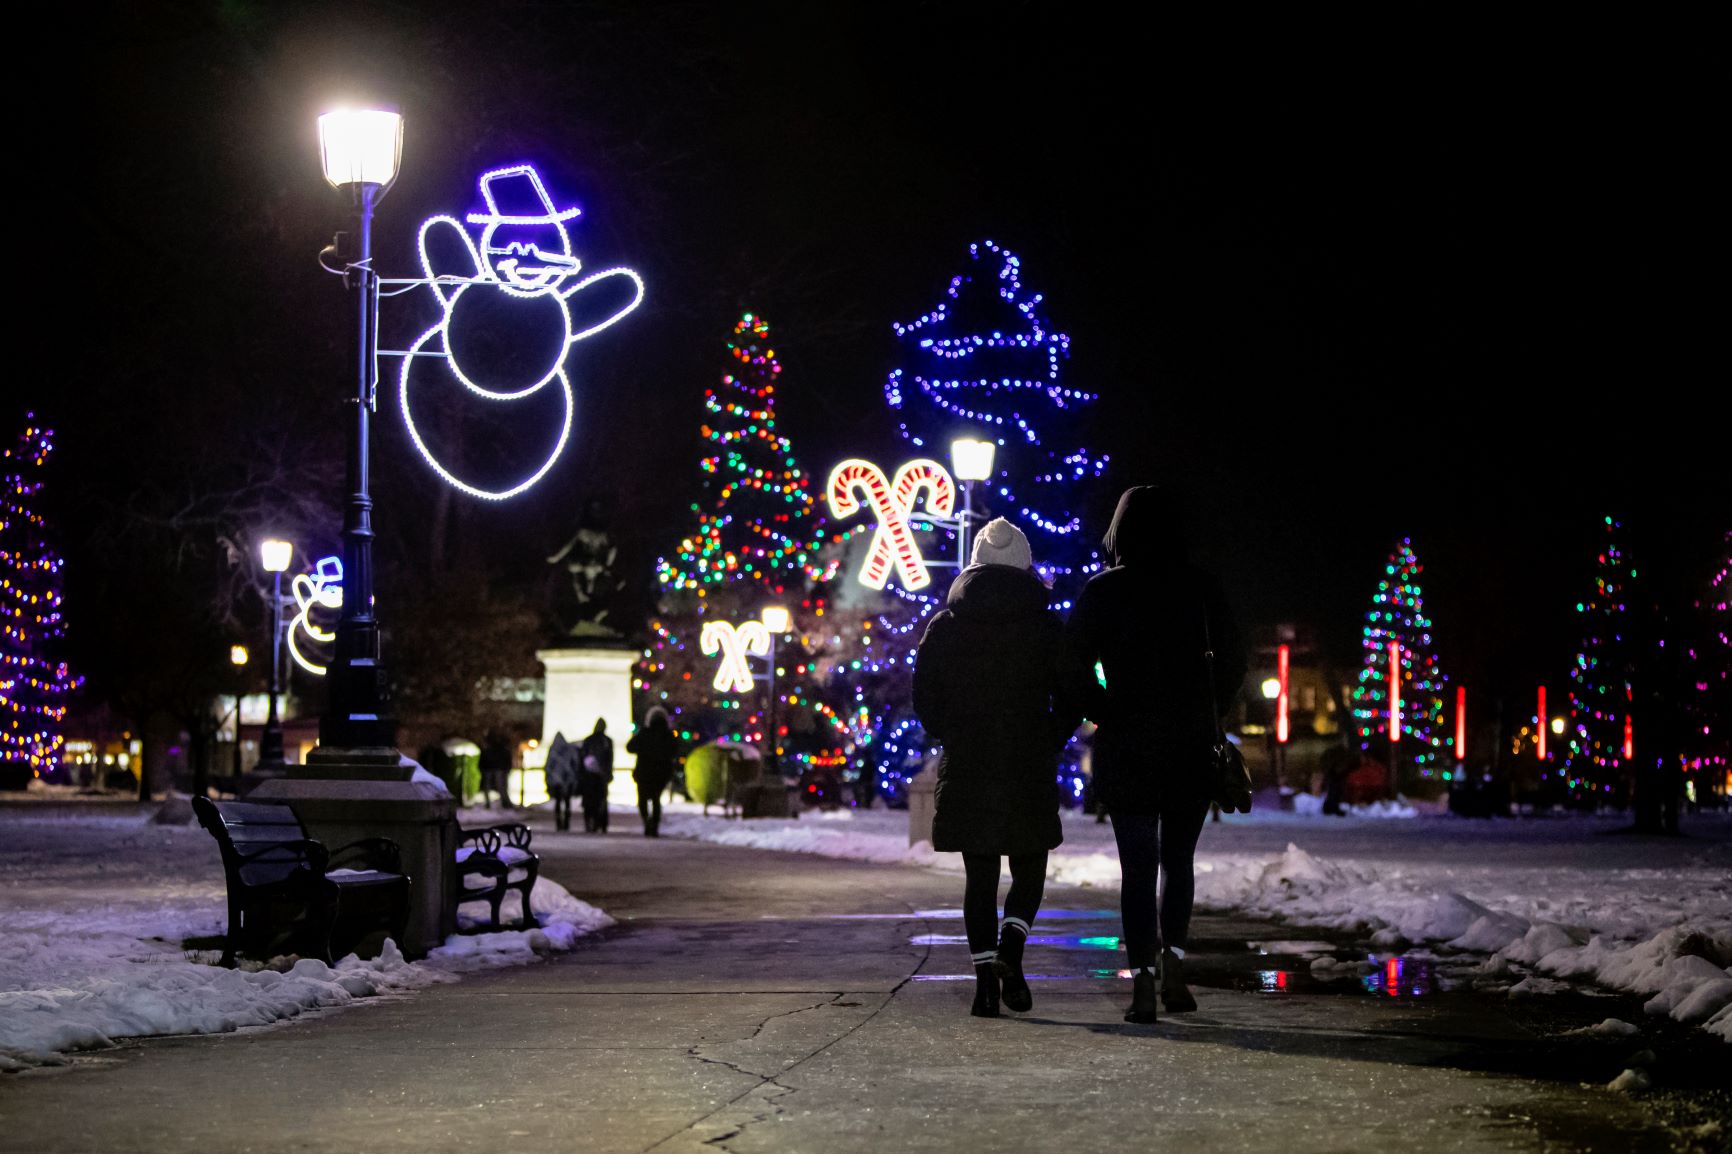 Two people walking through park with holiday lights and decorations along the parkway